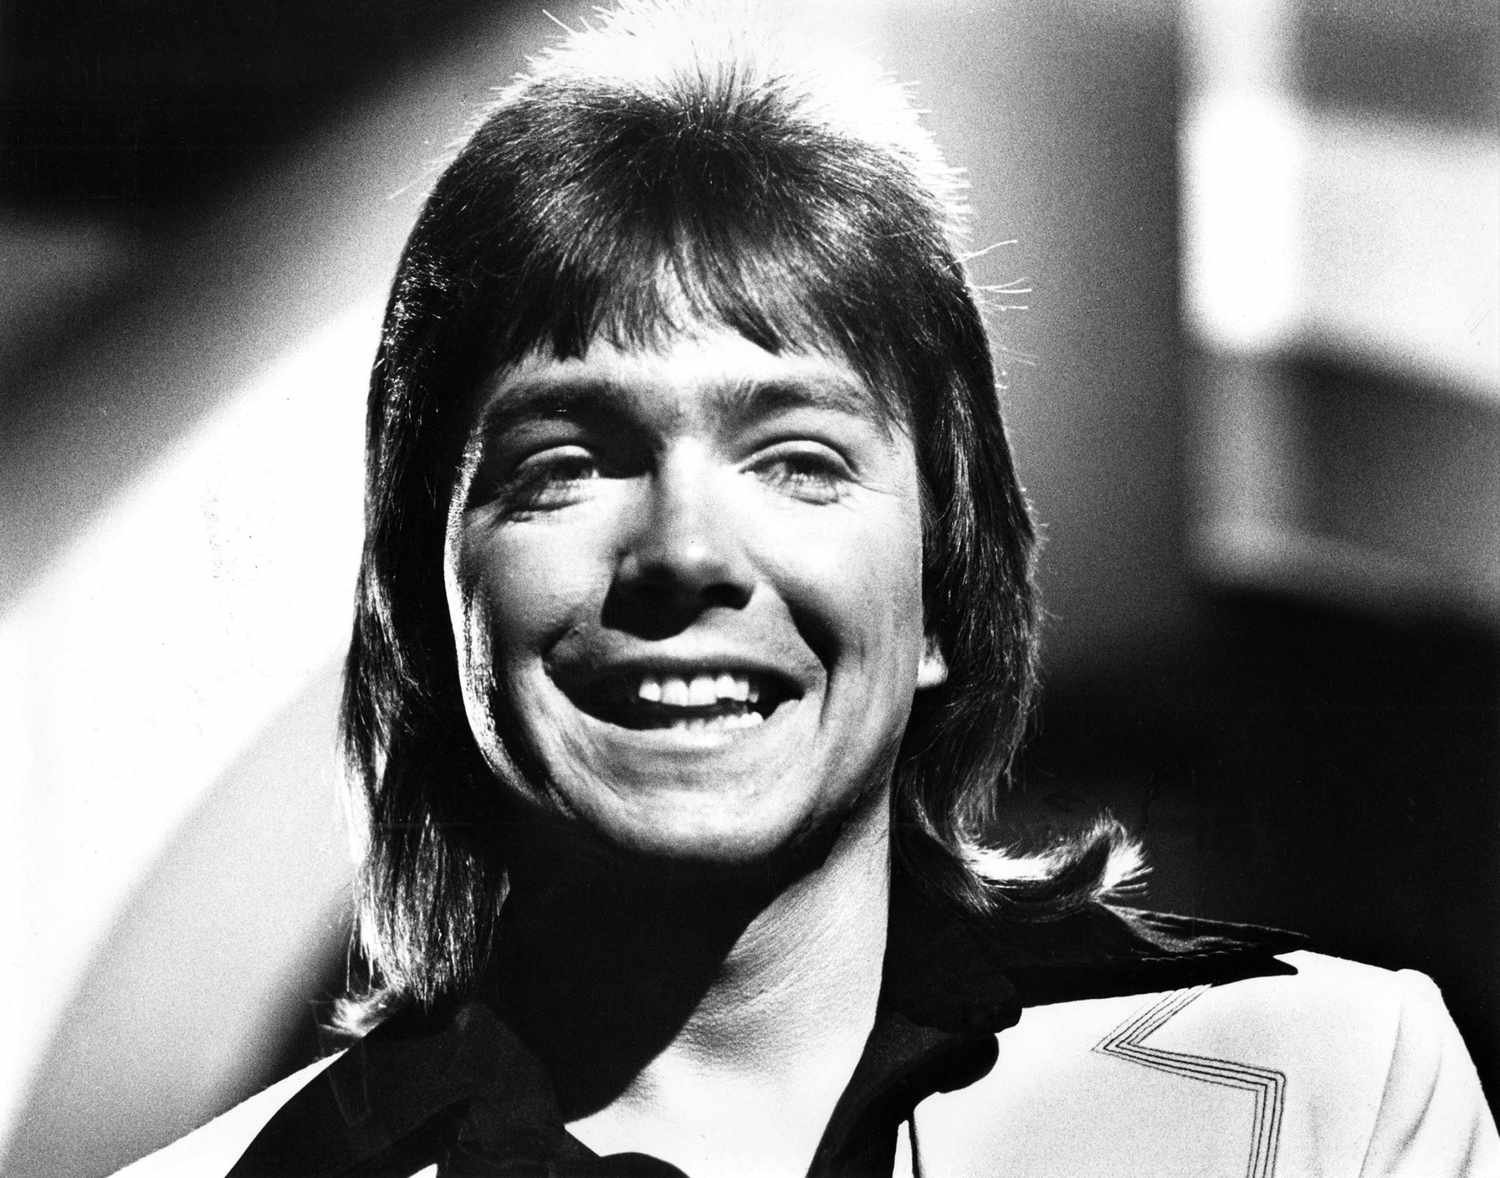 David Cassidy Performs Live In Amsterdam